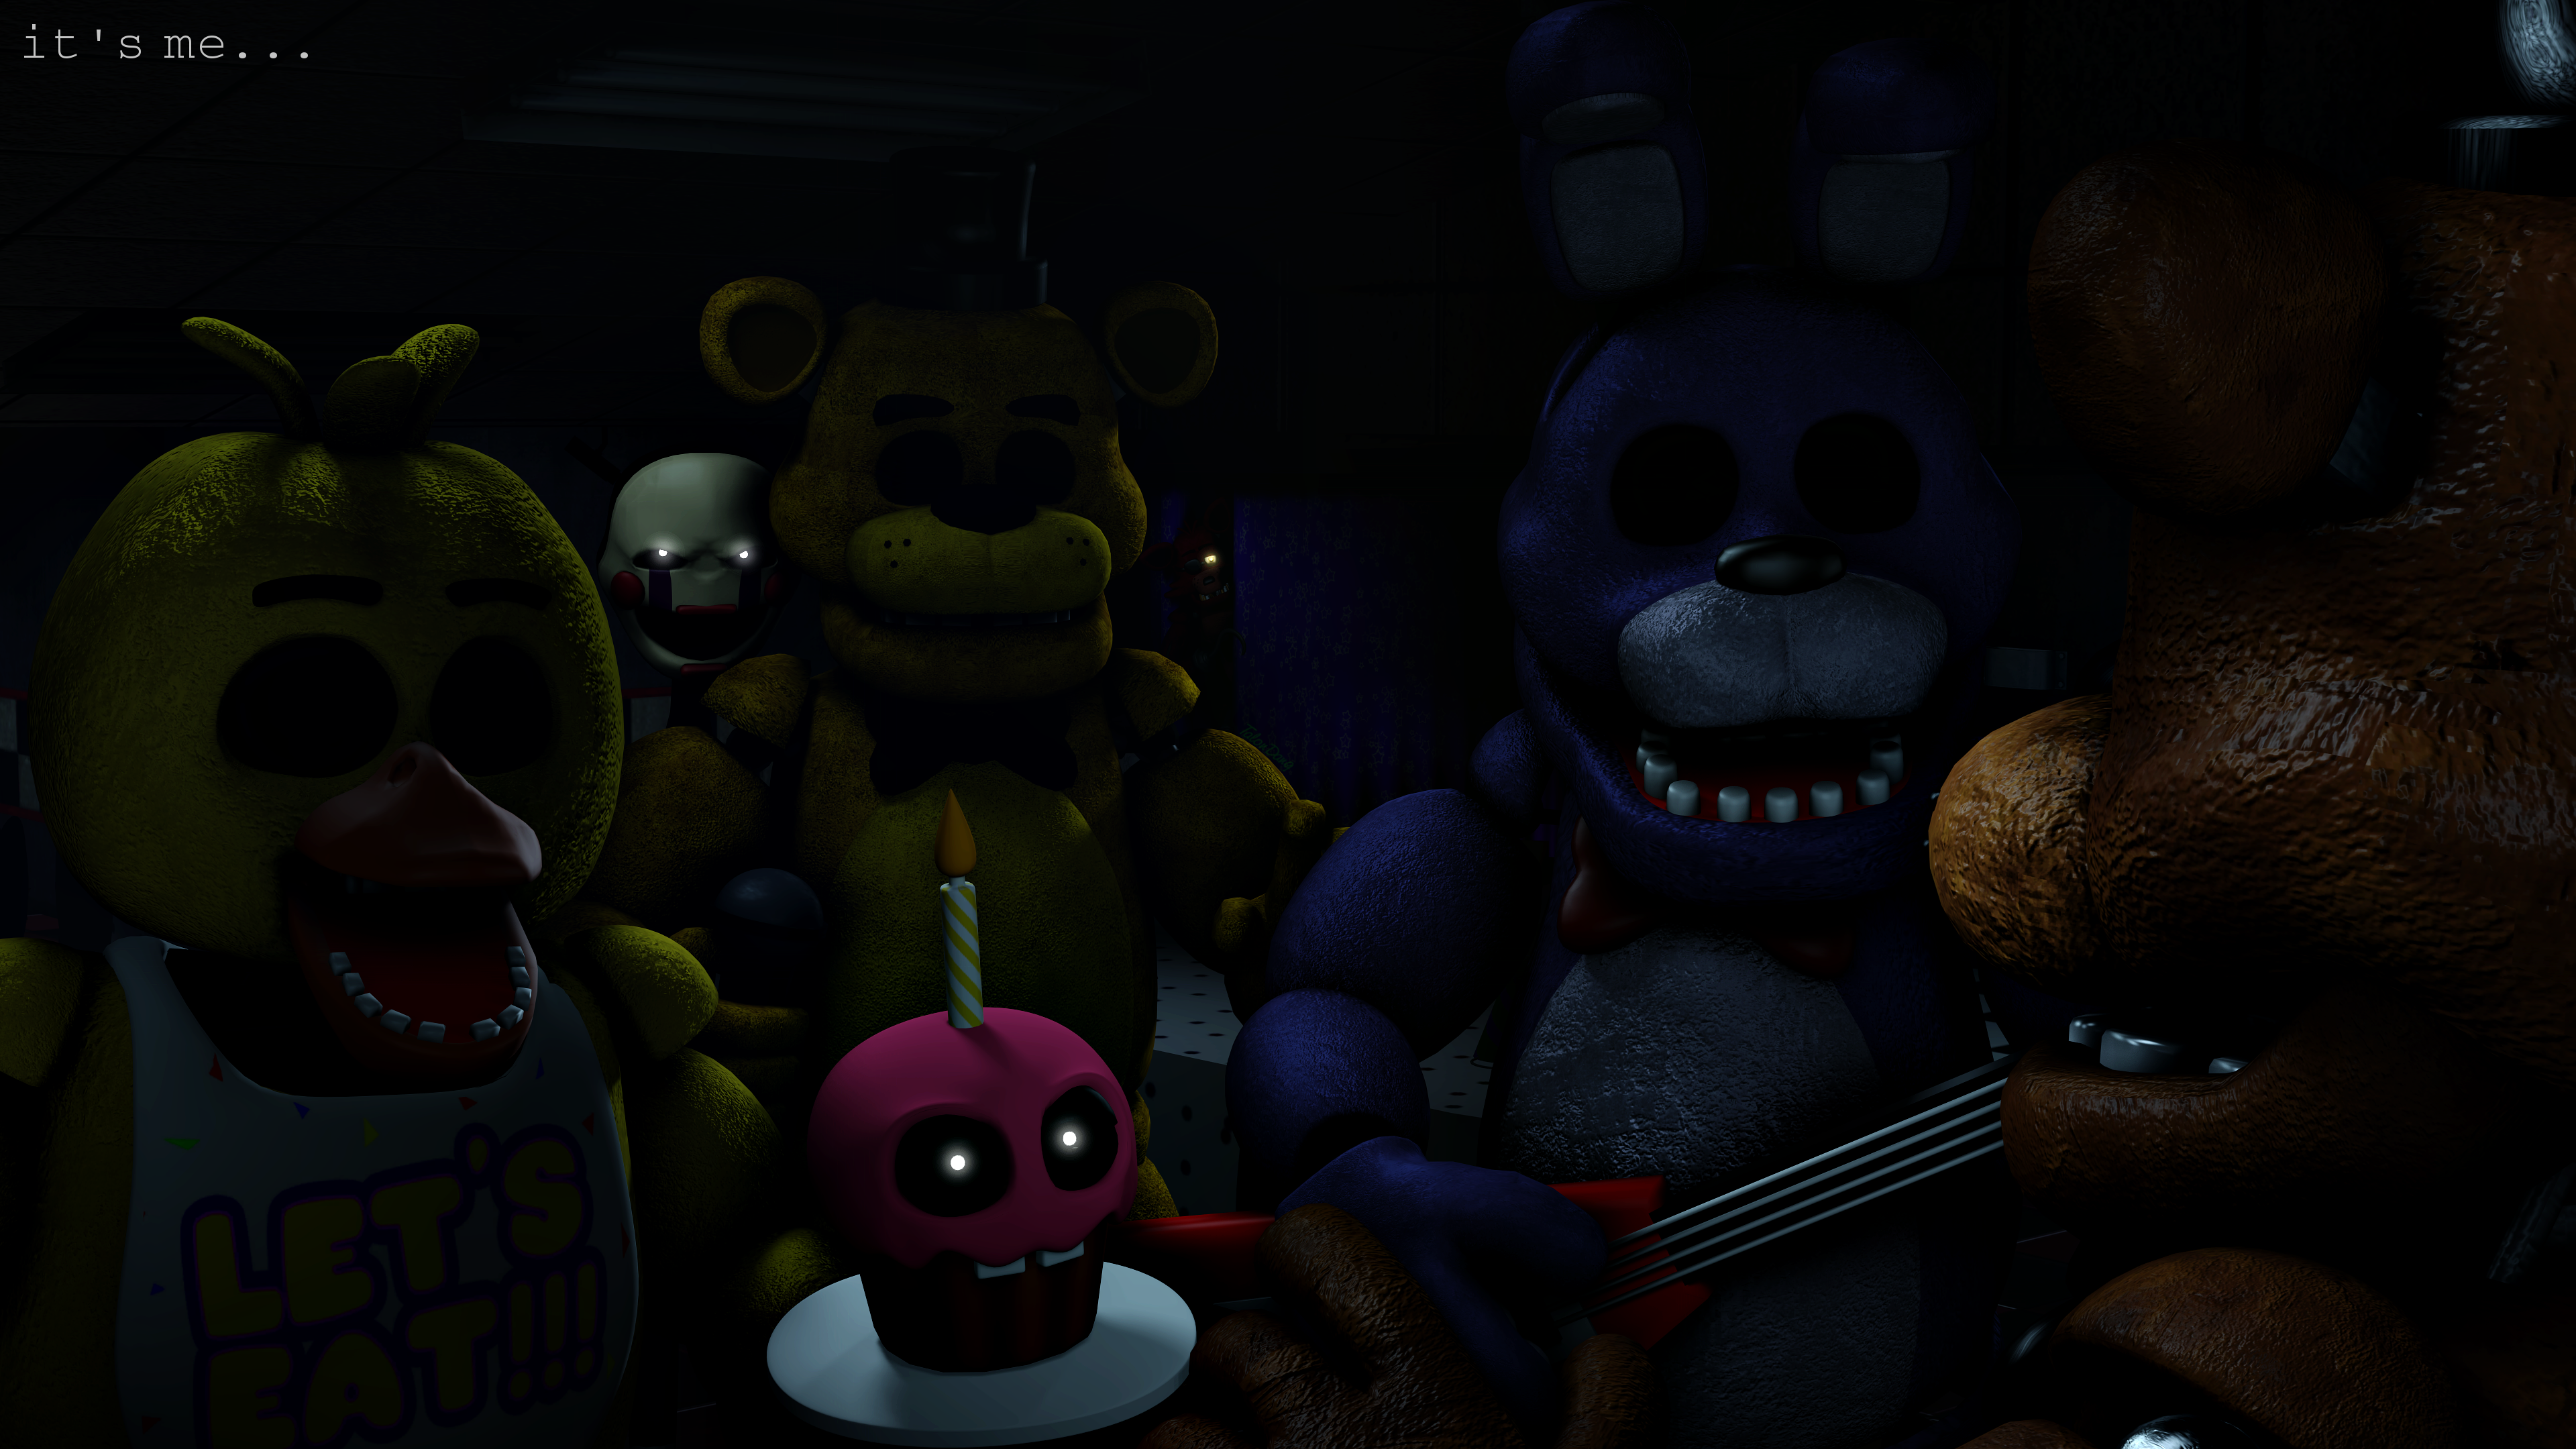 Video Game Five Nights At Freddy 039 S 2 3840x2160